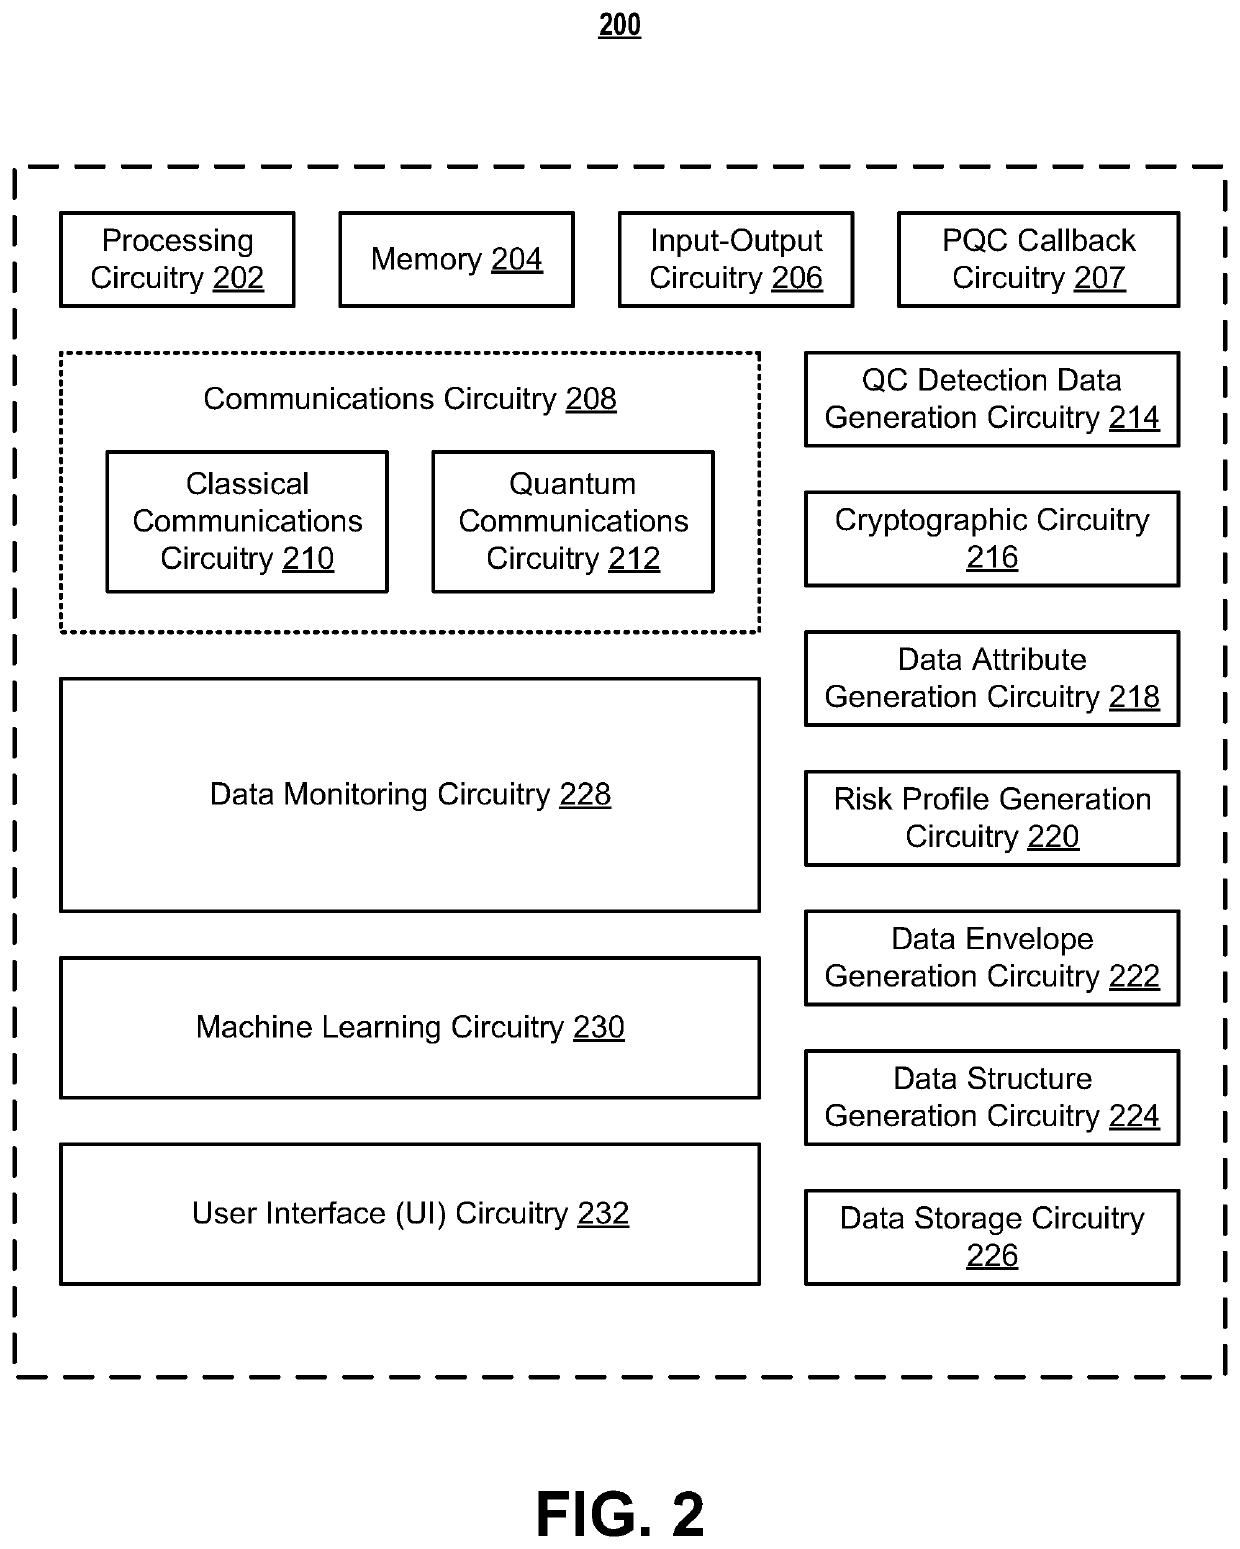 Systems and methods for disparate quantum computing threat detection